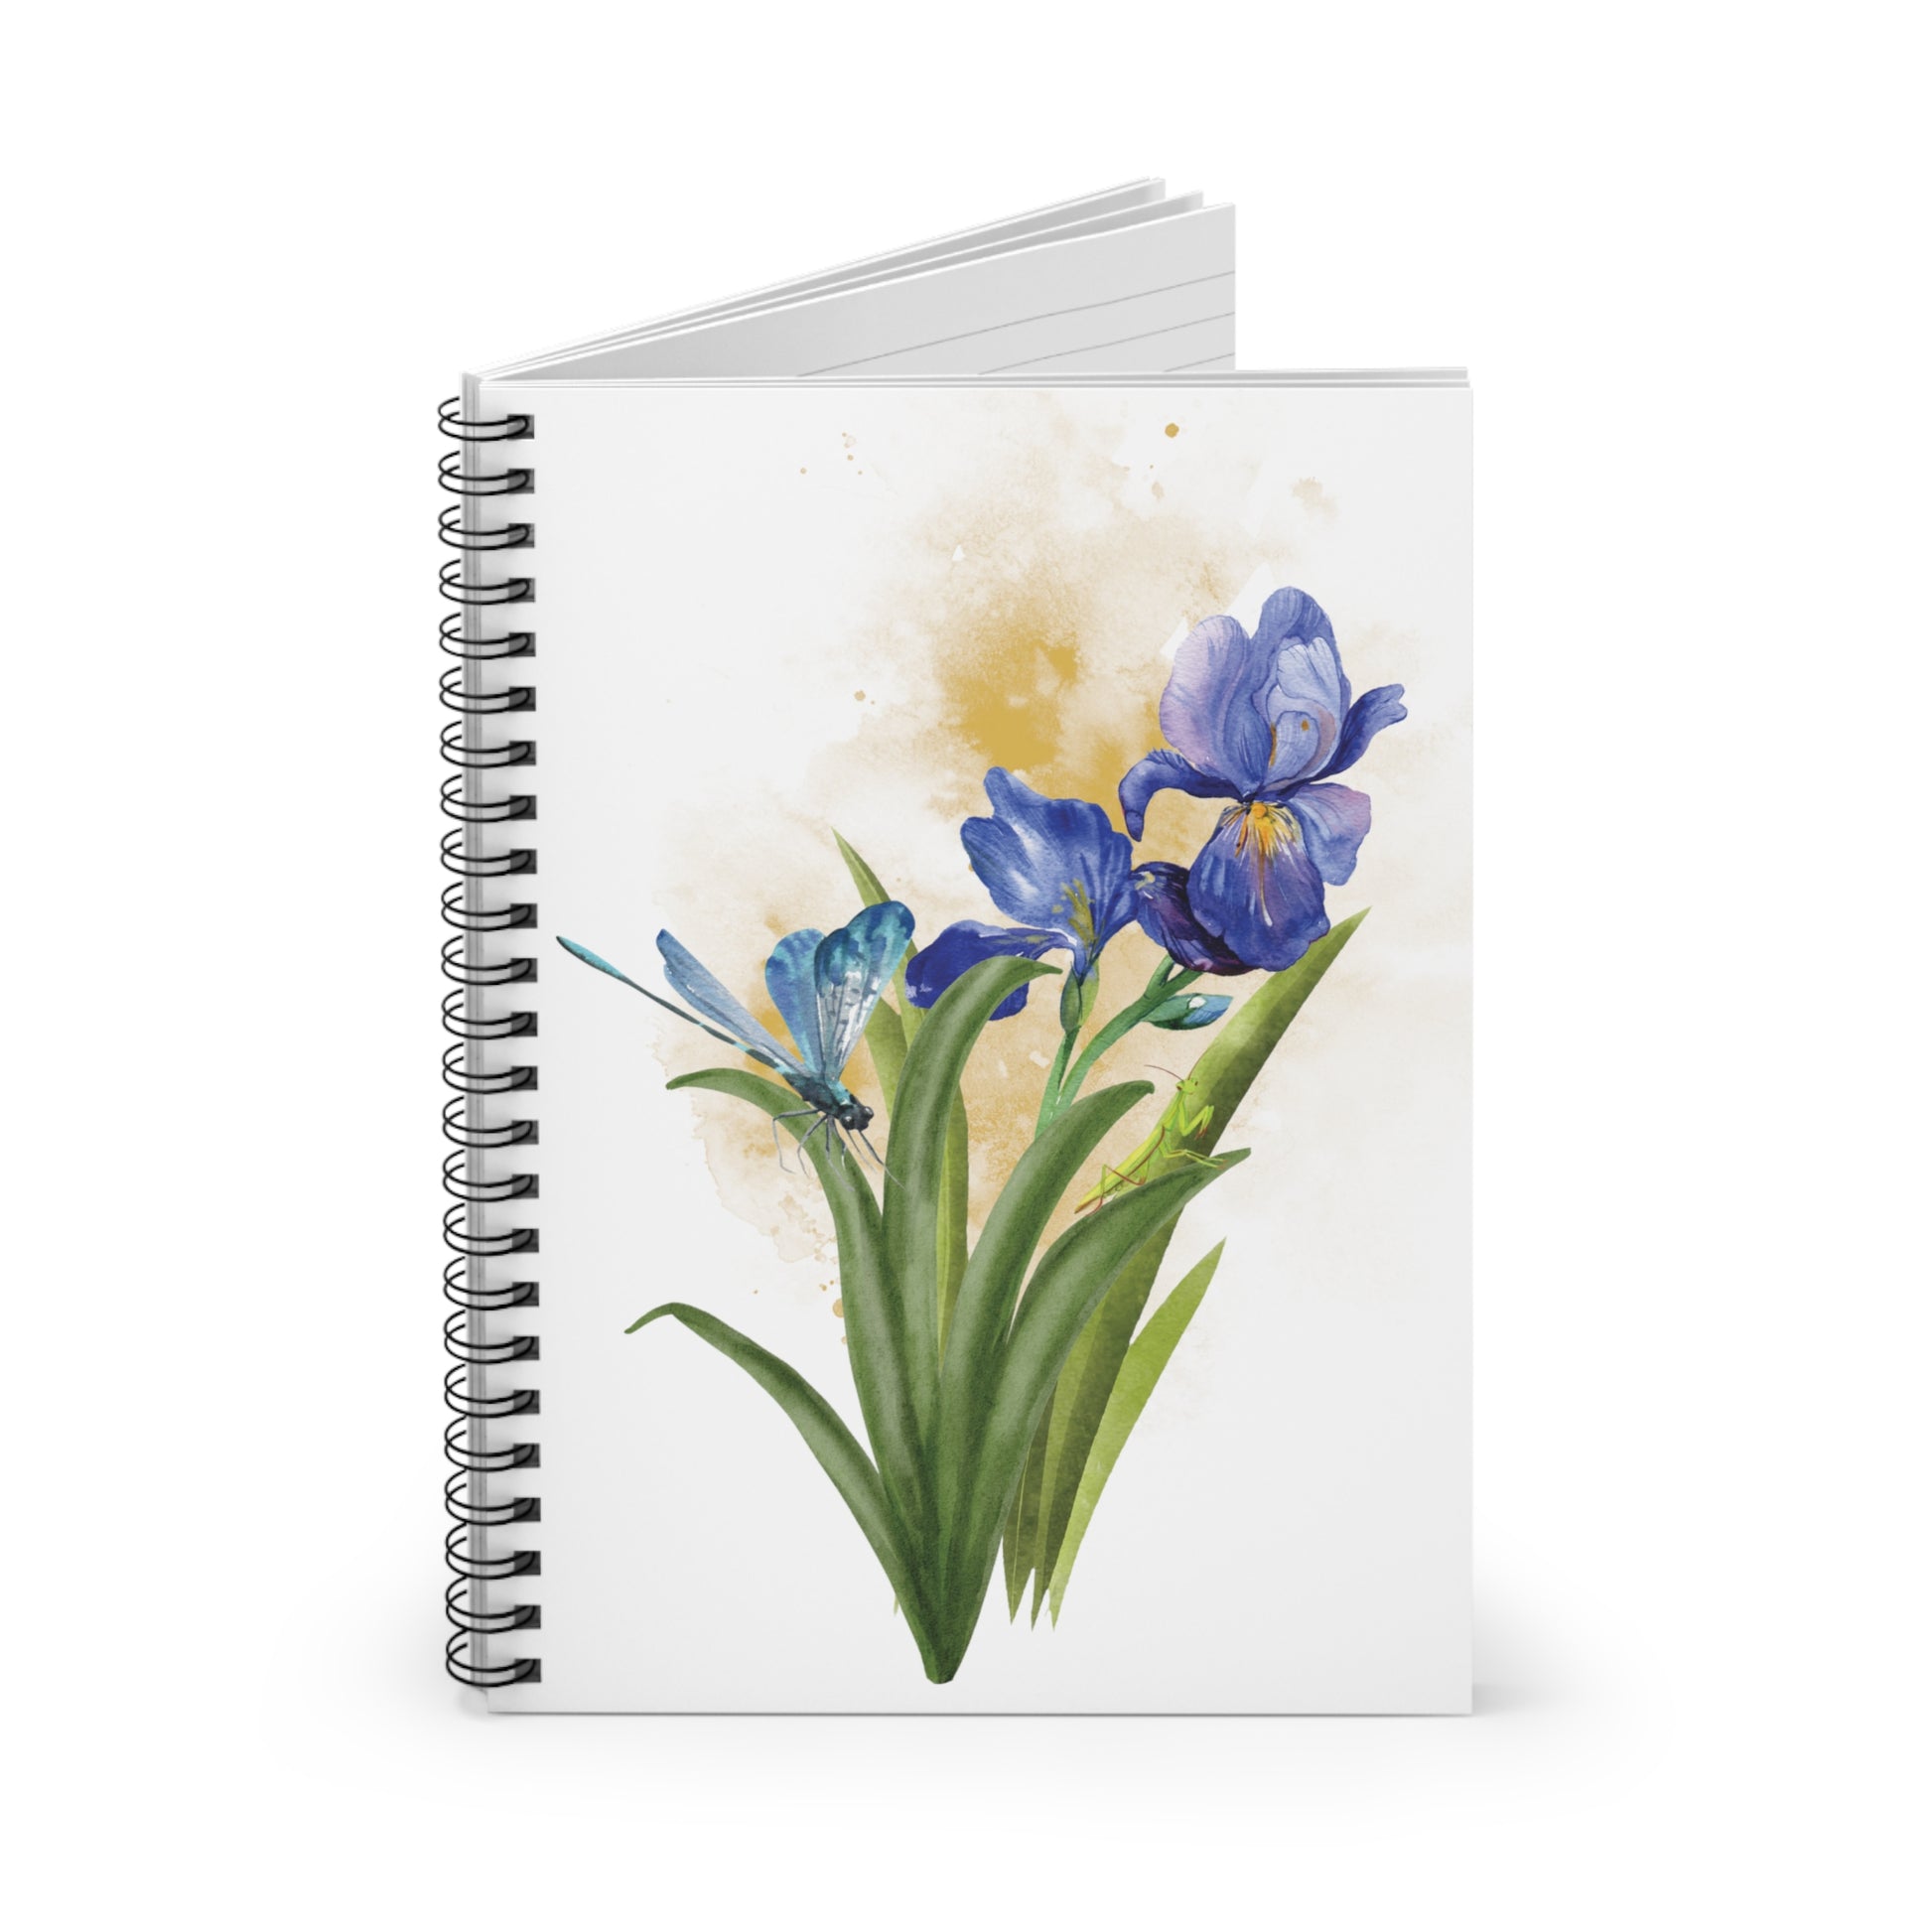 Iris Dragonfly: Spiral Notebook - Log Books - Journals - Diaries - and More Custom Printed by TheGlassyLass